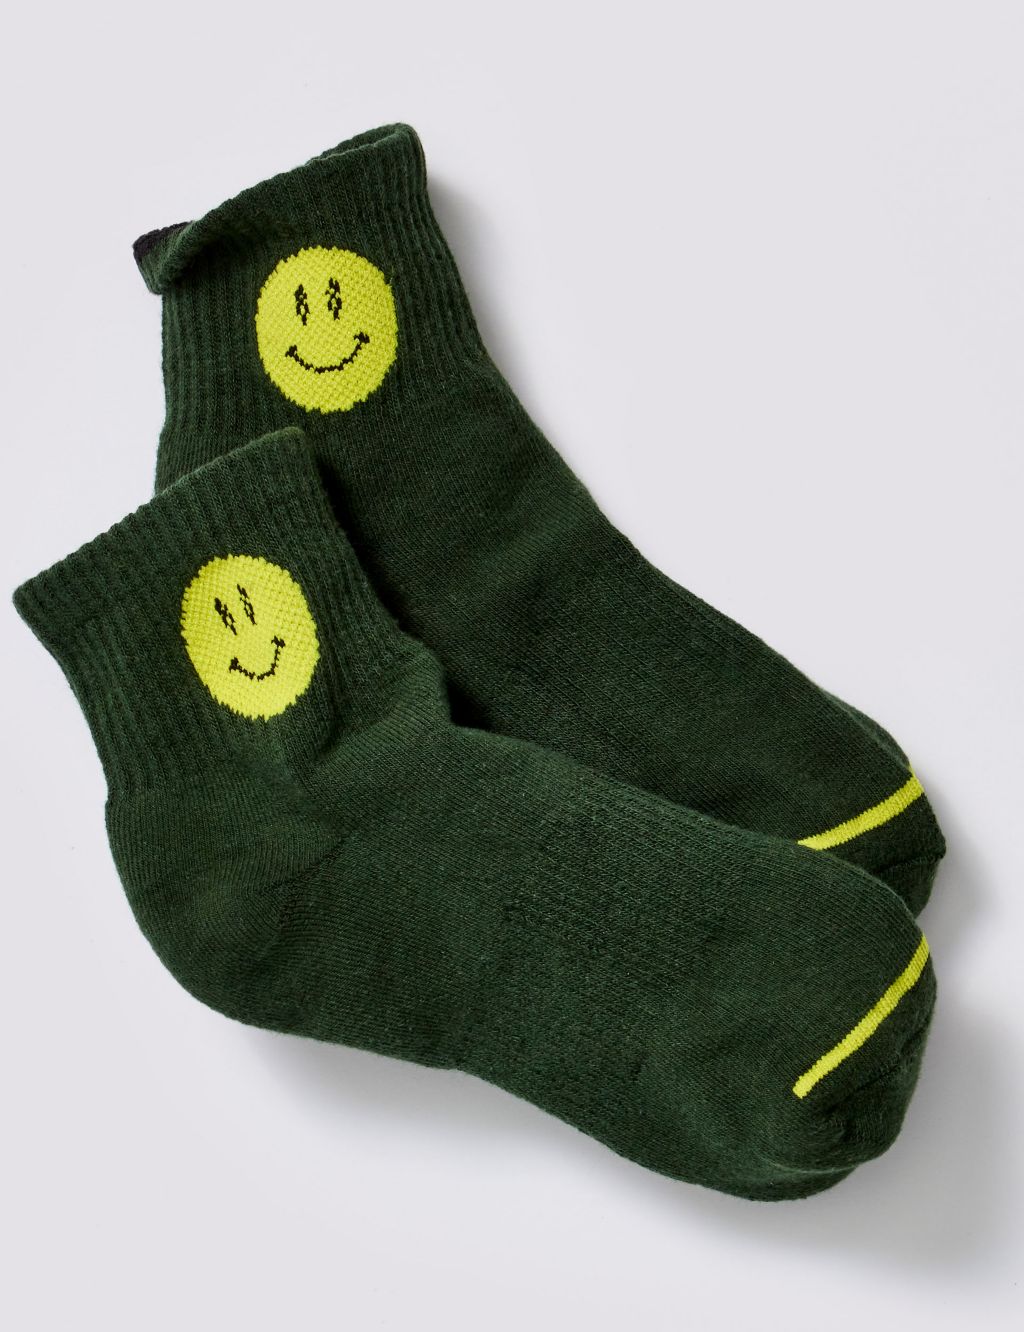 Cotton Rich Smiling Ankle Socks